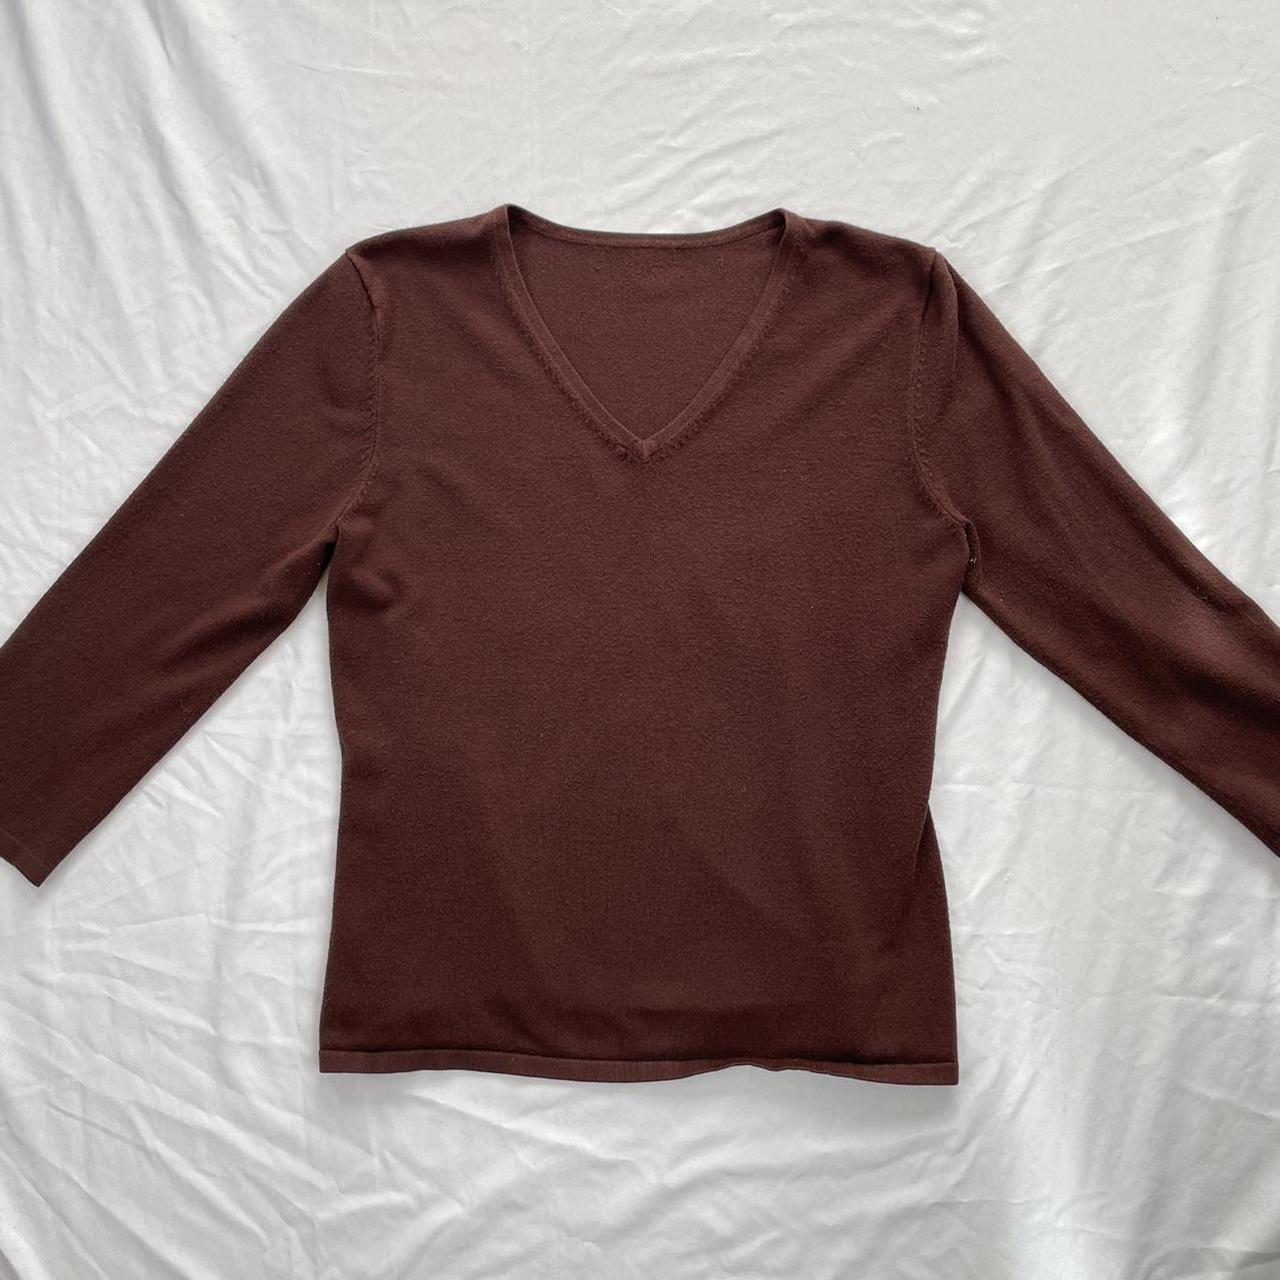 Product Image 2 - brown fitted top 

very flattering